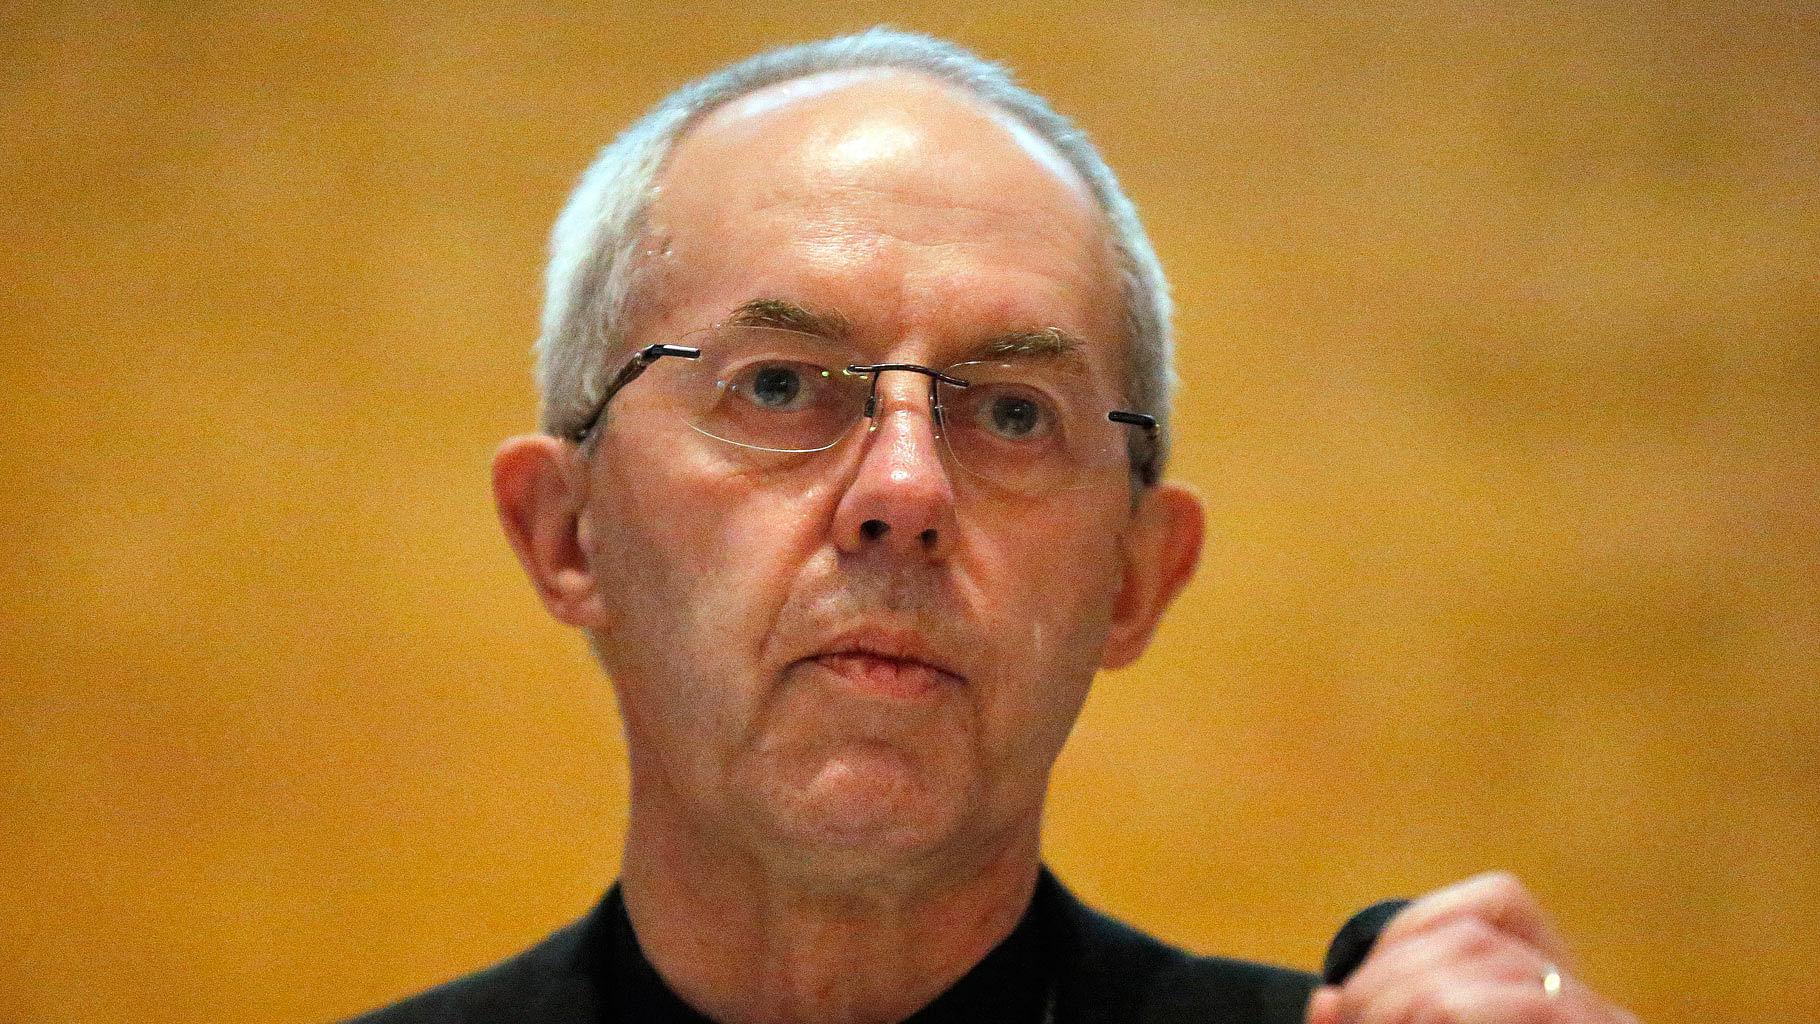 The Most Reverend Justin Welby, 60, had decided to take a DNA test after being approached by <i>The Daily Telegraph</i>. (Photo: AP)